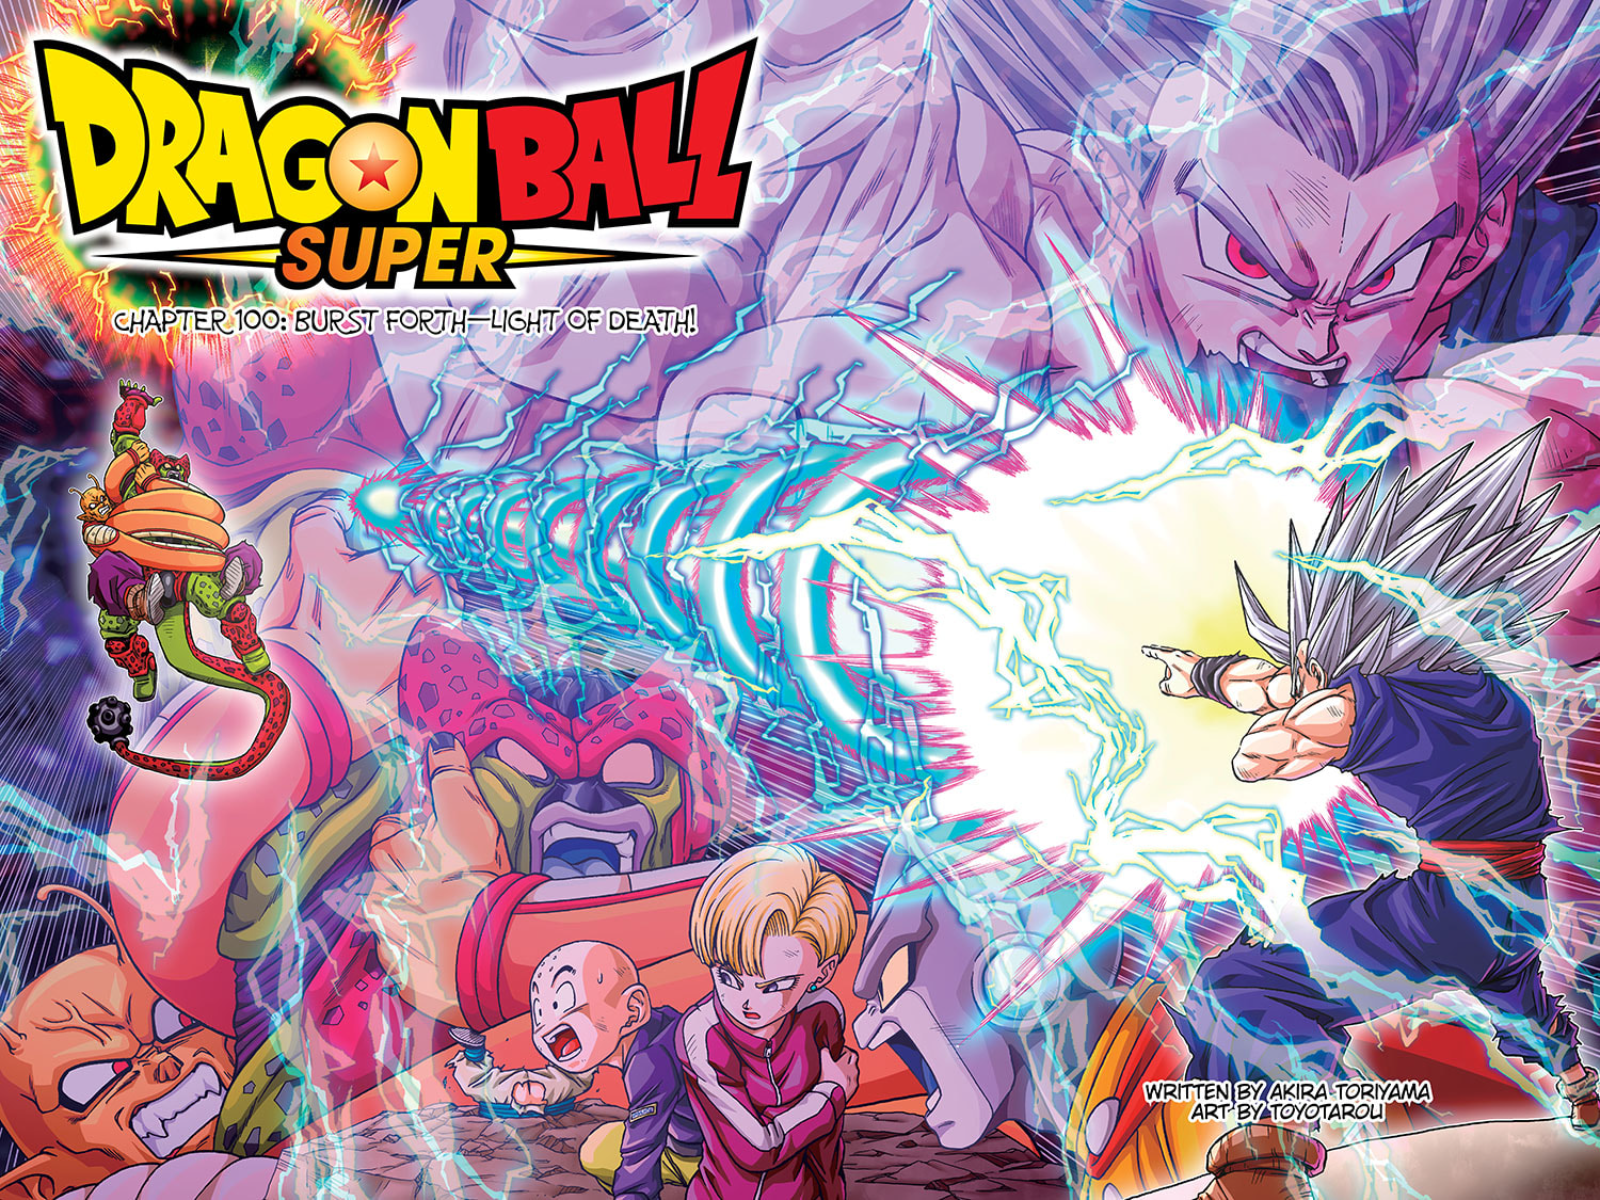 Celebrating the Release of Dragon Ball Super Chapter 100 & ULTRA